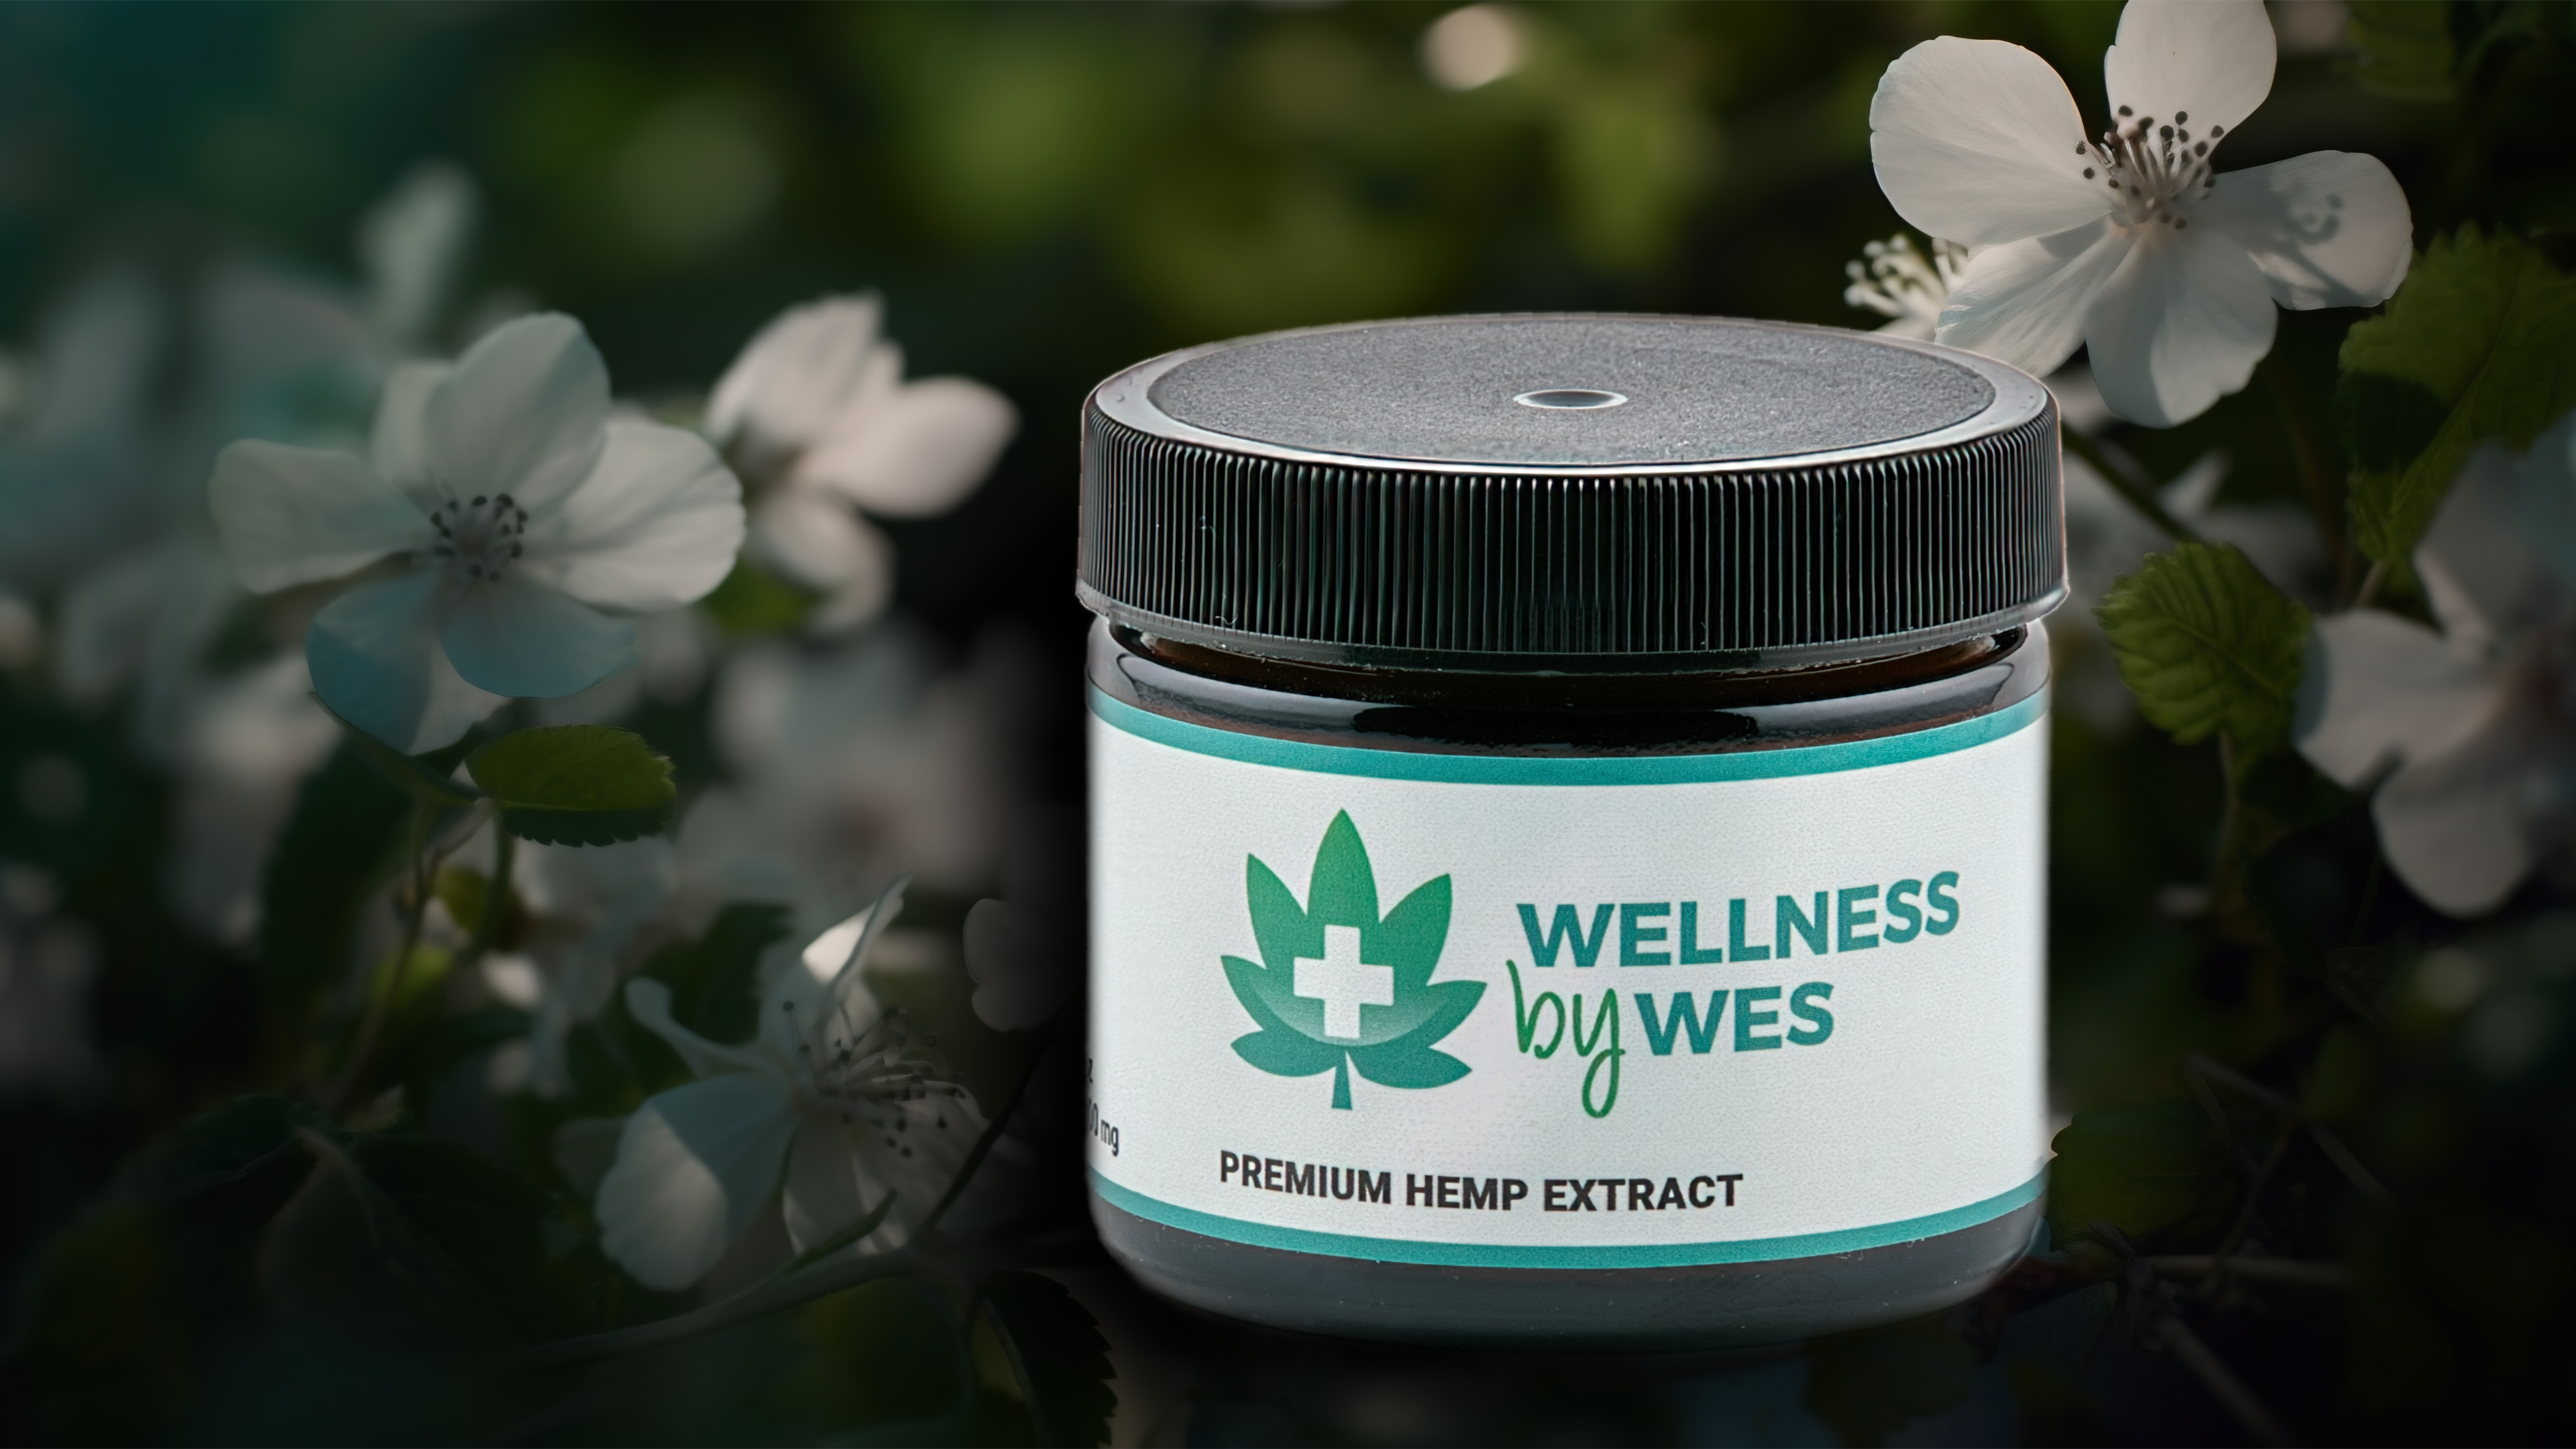 USDA Certified Organic CBD Salve by Wellness by Wes for Joint Pain Relief